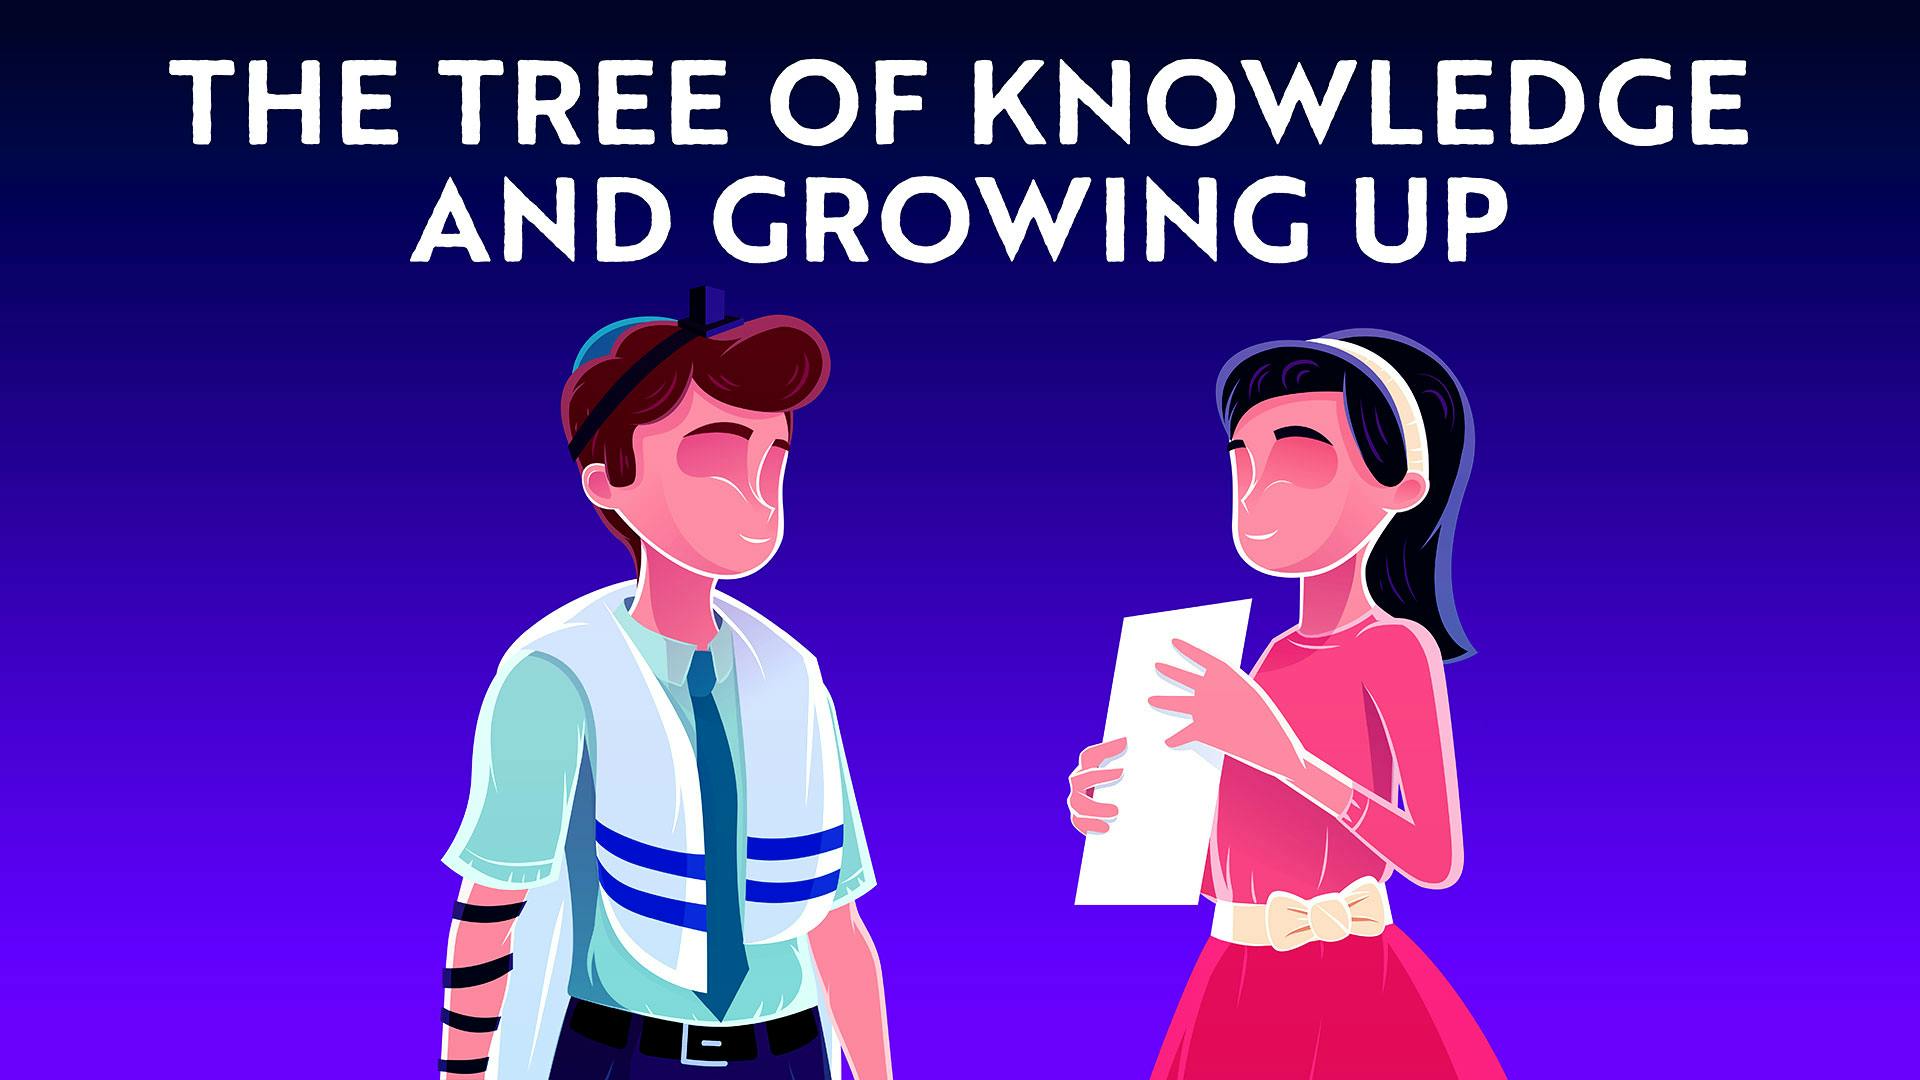 The Tree of Knowledge and Growing Up